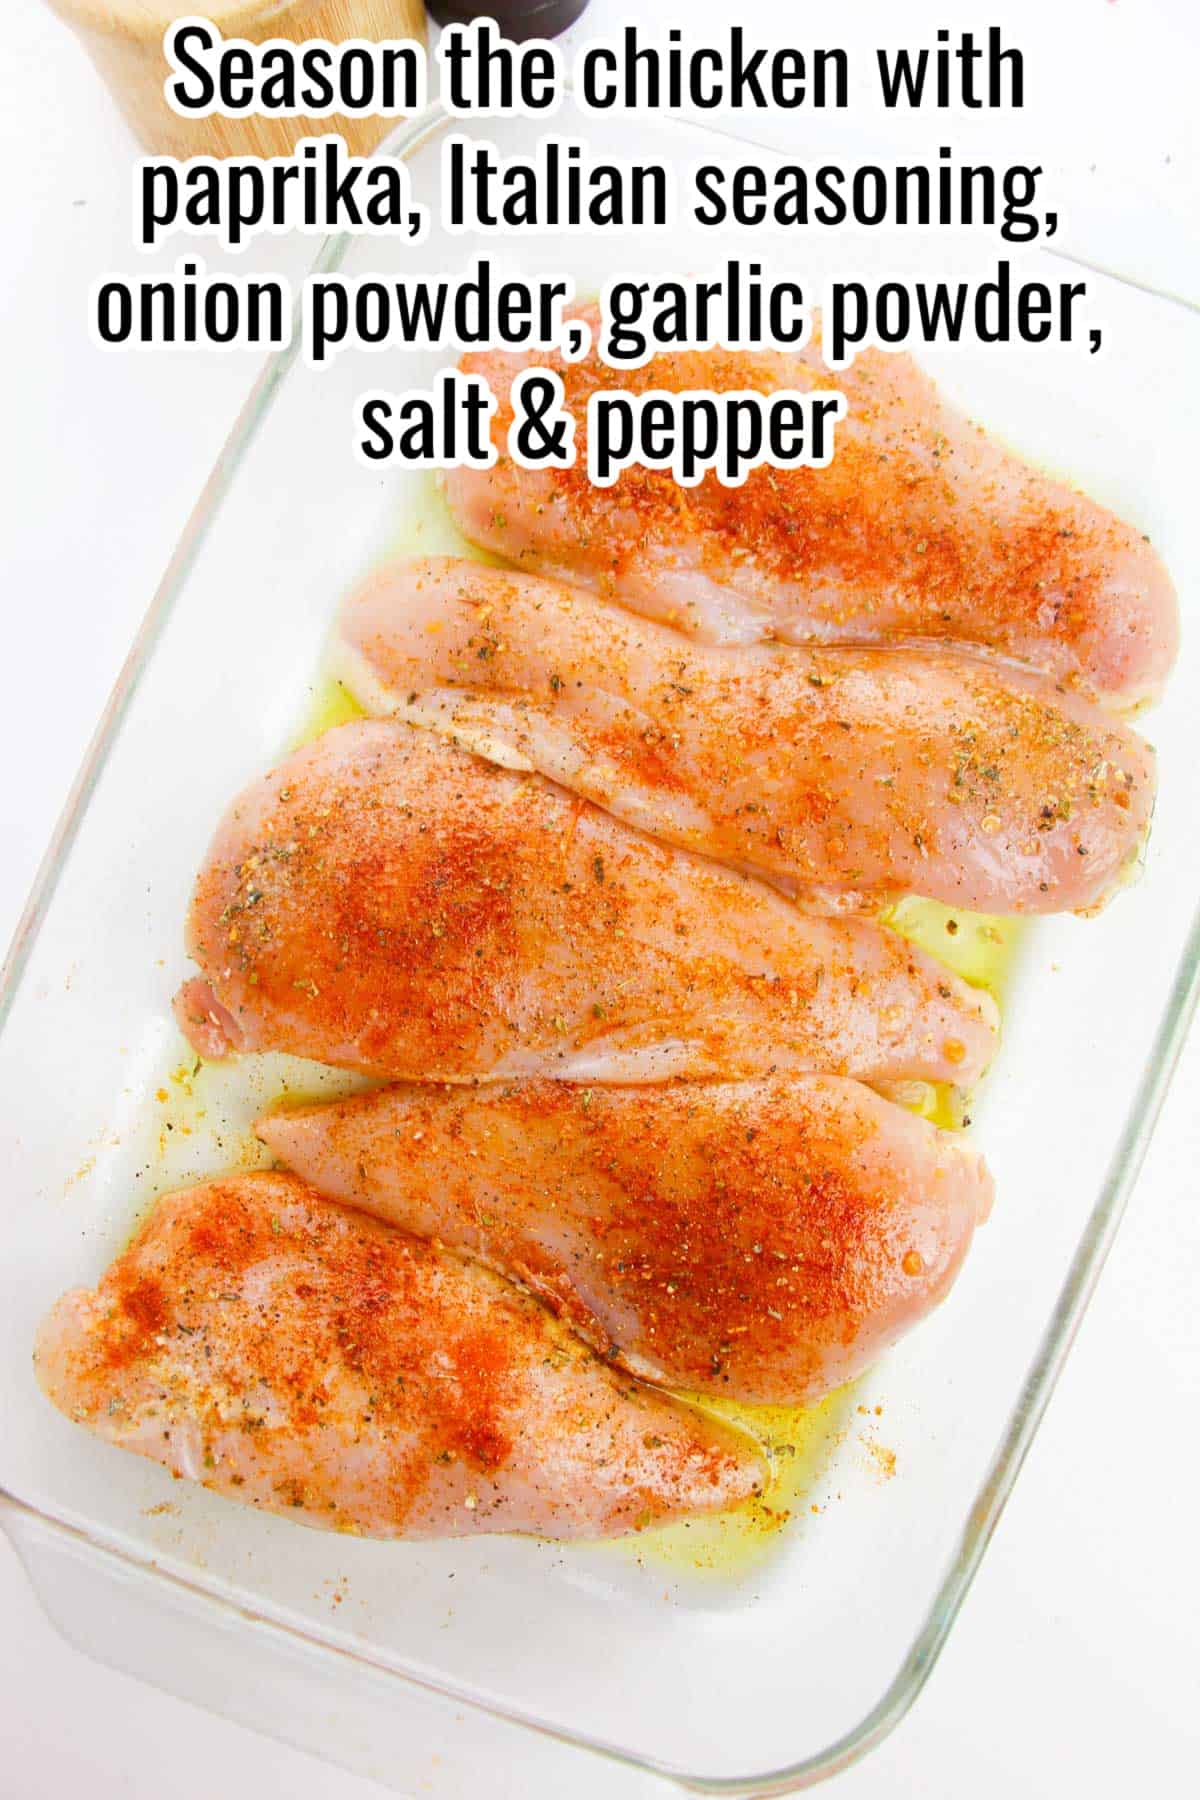 raw seasoned chicken breasts in a baking dish with instructions overlaid in text.